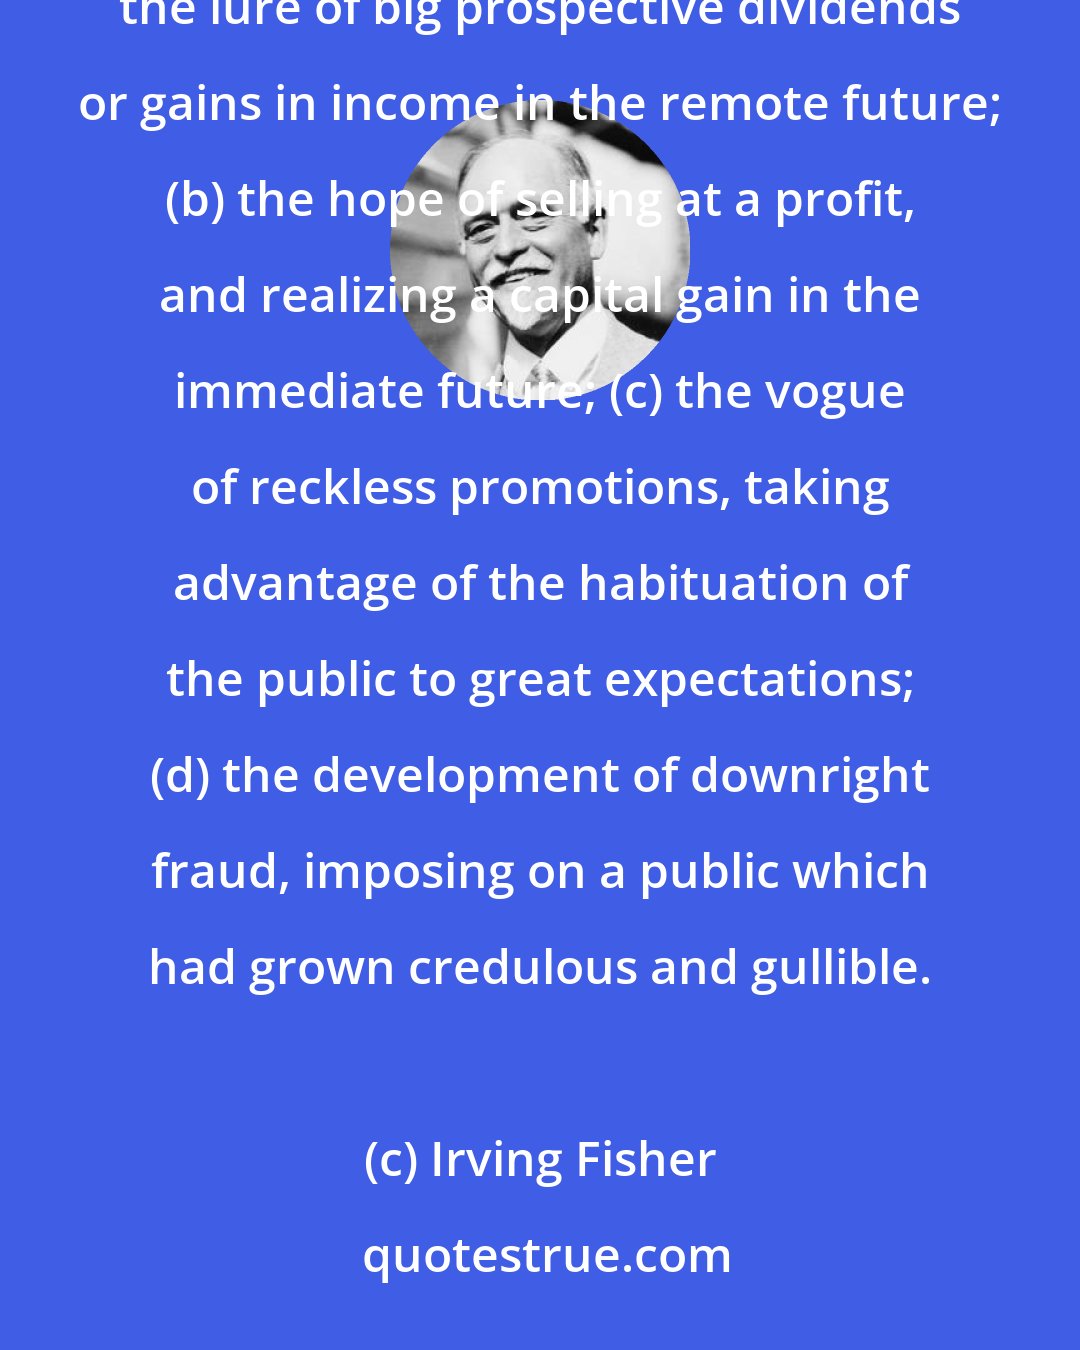 Irving Fisher: The public psychology of going into debt for gain passes through several more or less distinct phases: (a) the lure of big prospective dividends or gains in income in the remote future; (b) the hope of selling at a profit, and realizing a capital gain in the immediate future; (c) the vogue of reckless promotions, taking advantage of the habituation of the public to great expectations; (d) the development of downright fraud, imposing on a public which had grown credulous and gullible.